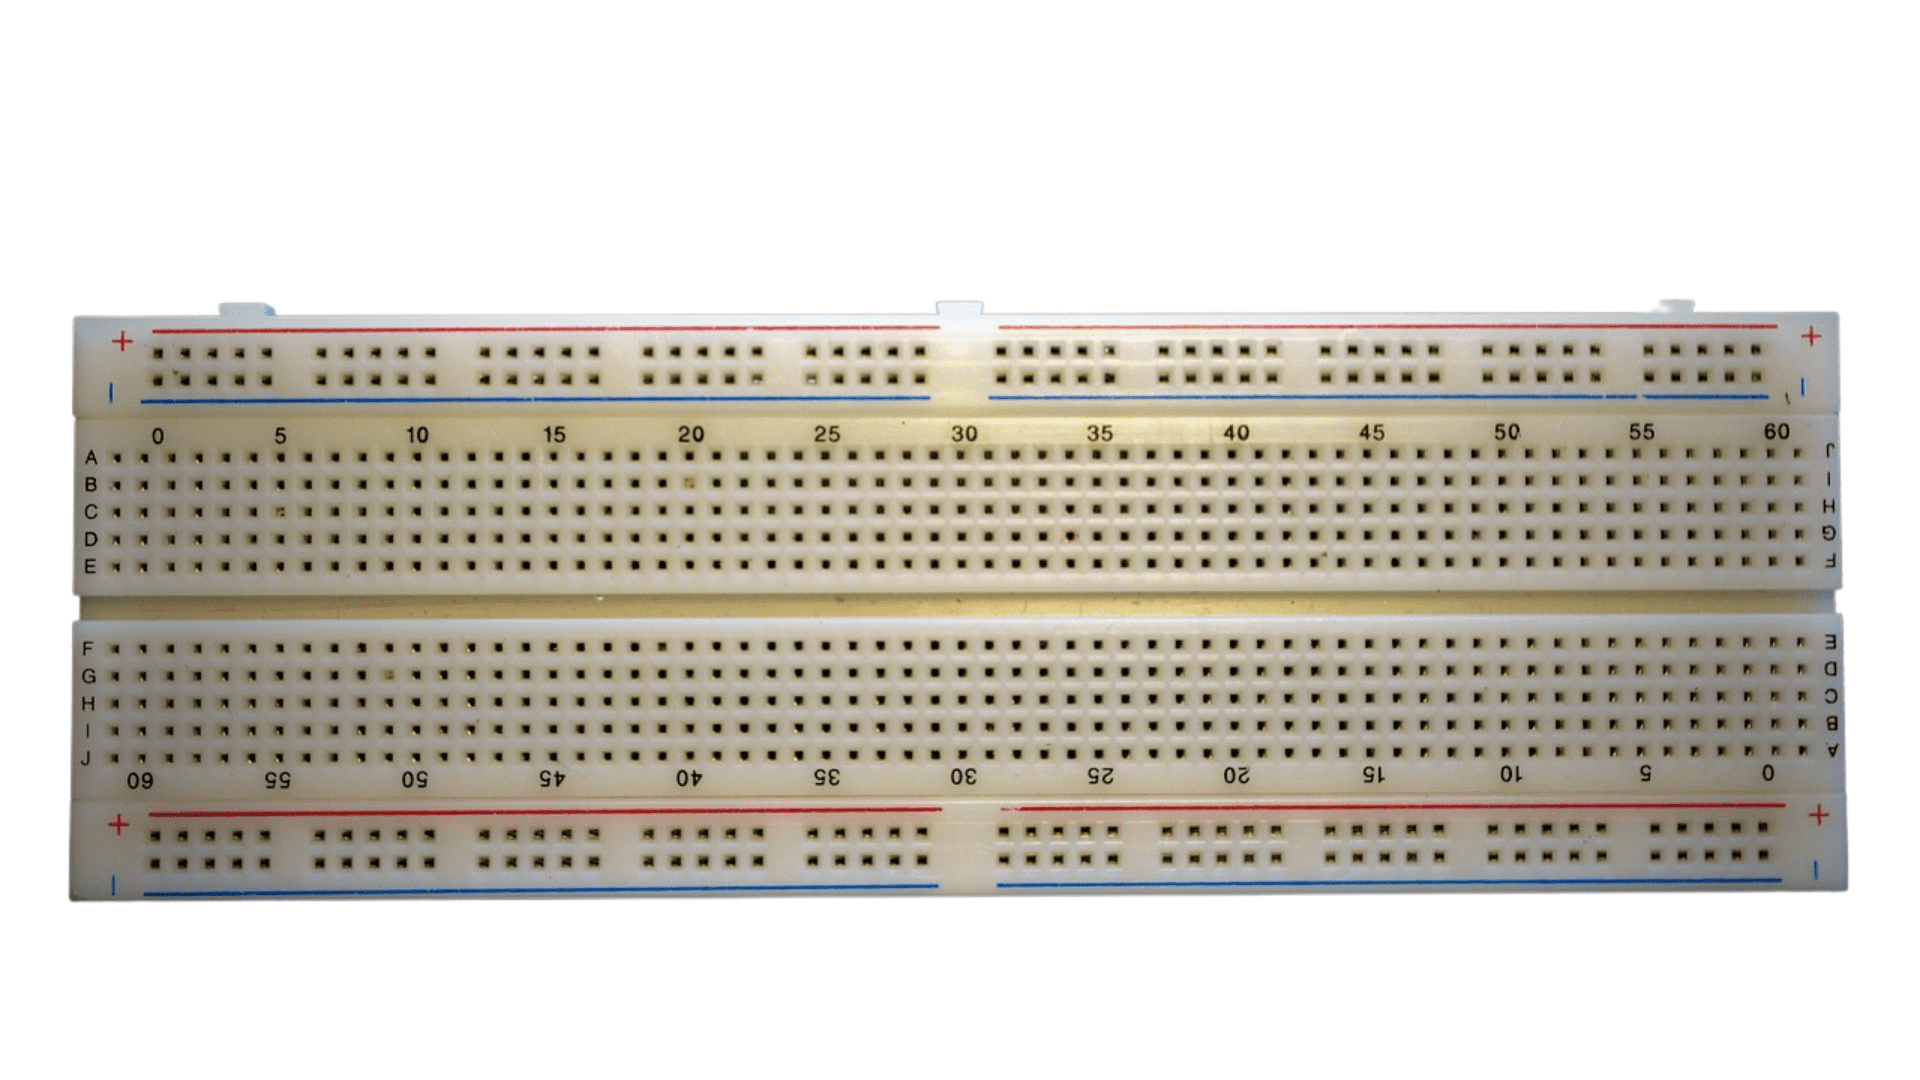 Prototyping Solderless Breadboard for Projects